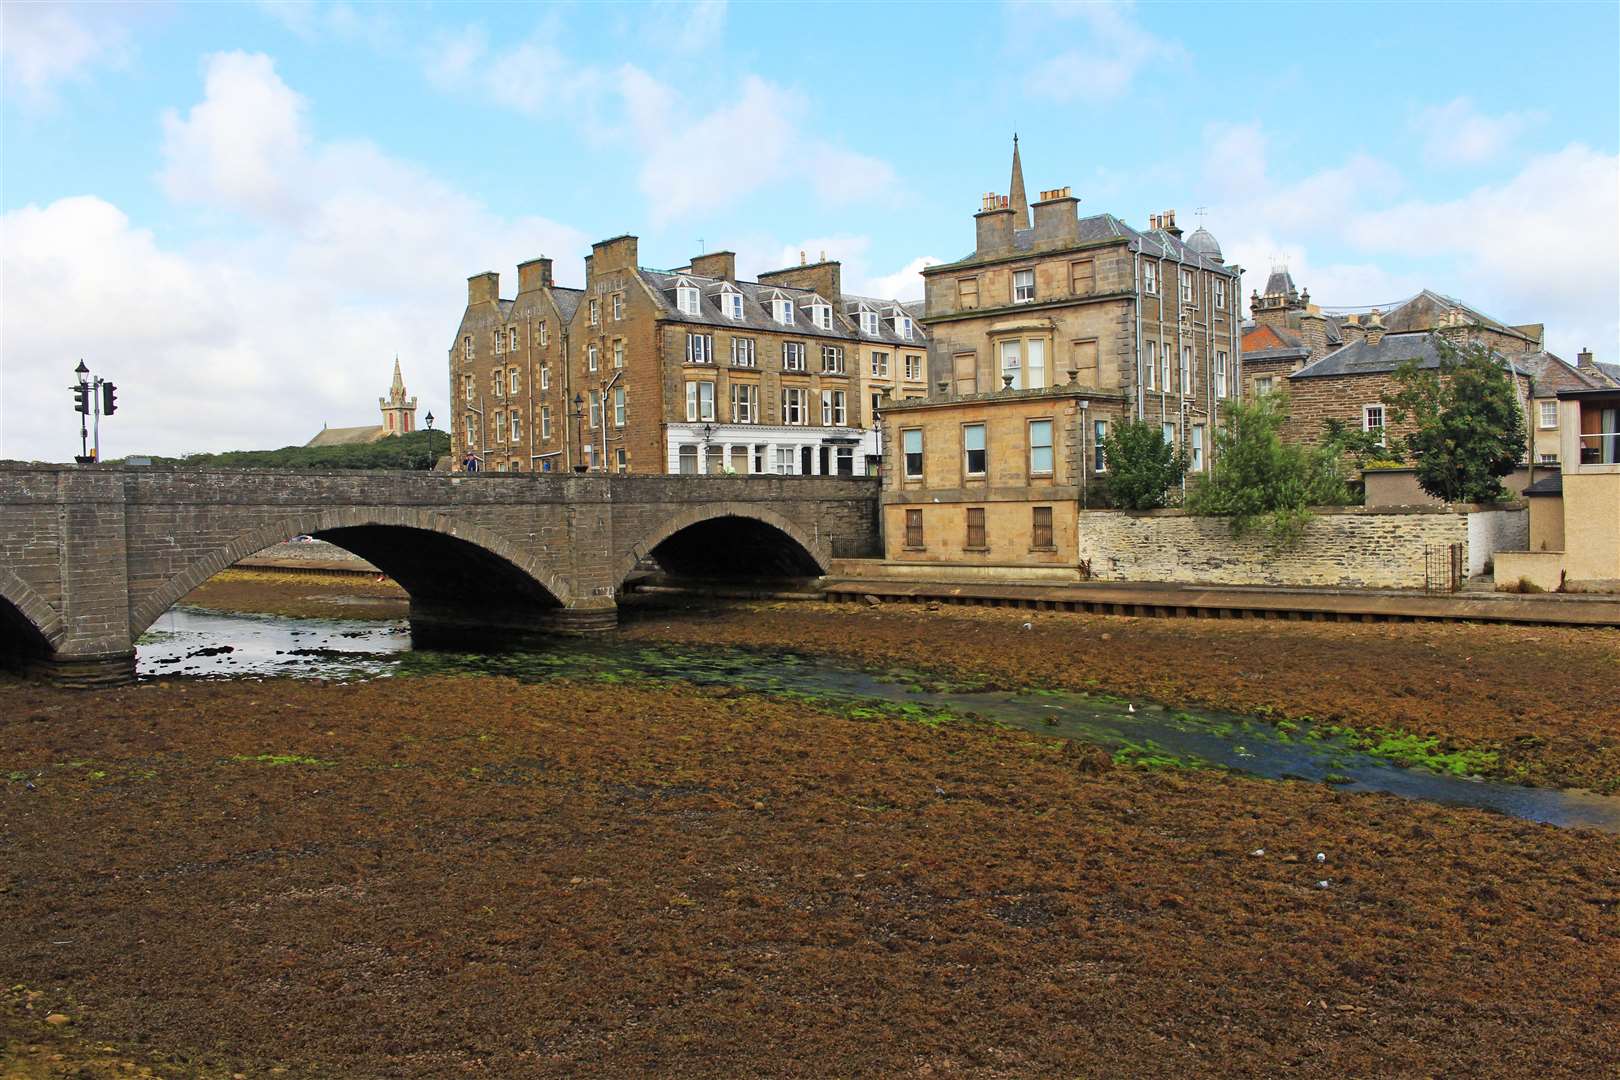 Wick River was reduced to a trickle under the town bridge by the end of August 2021. Picture: Alan Hendry